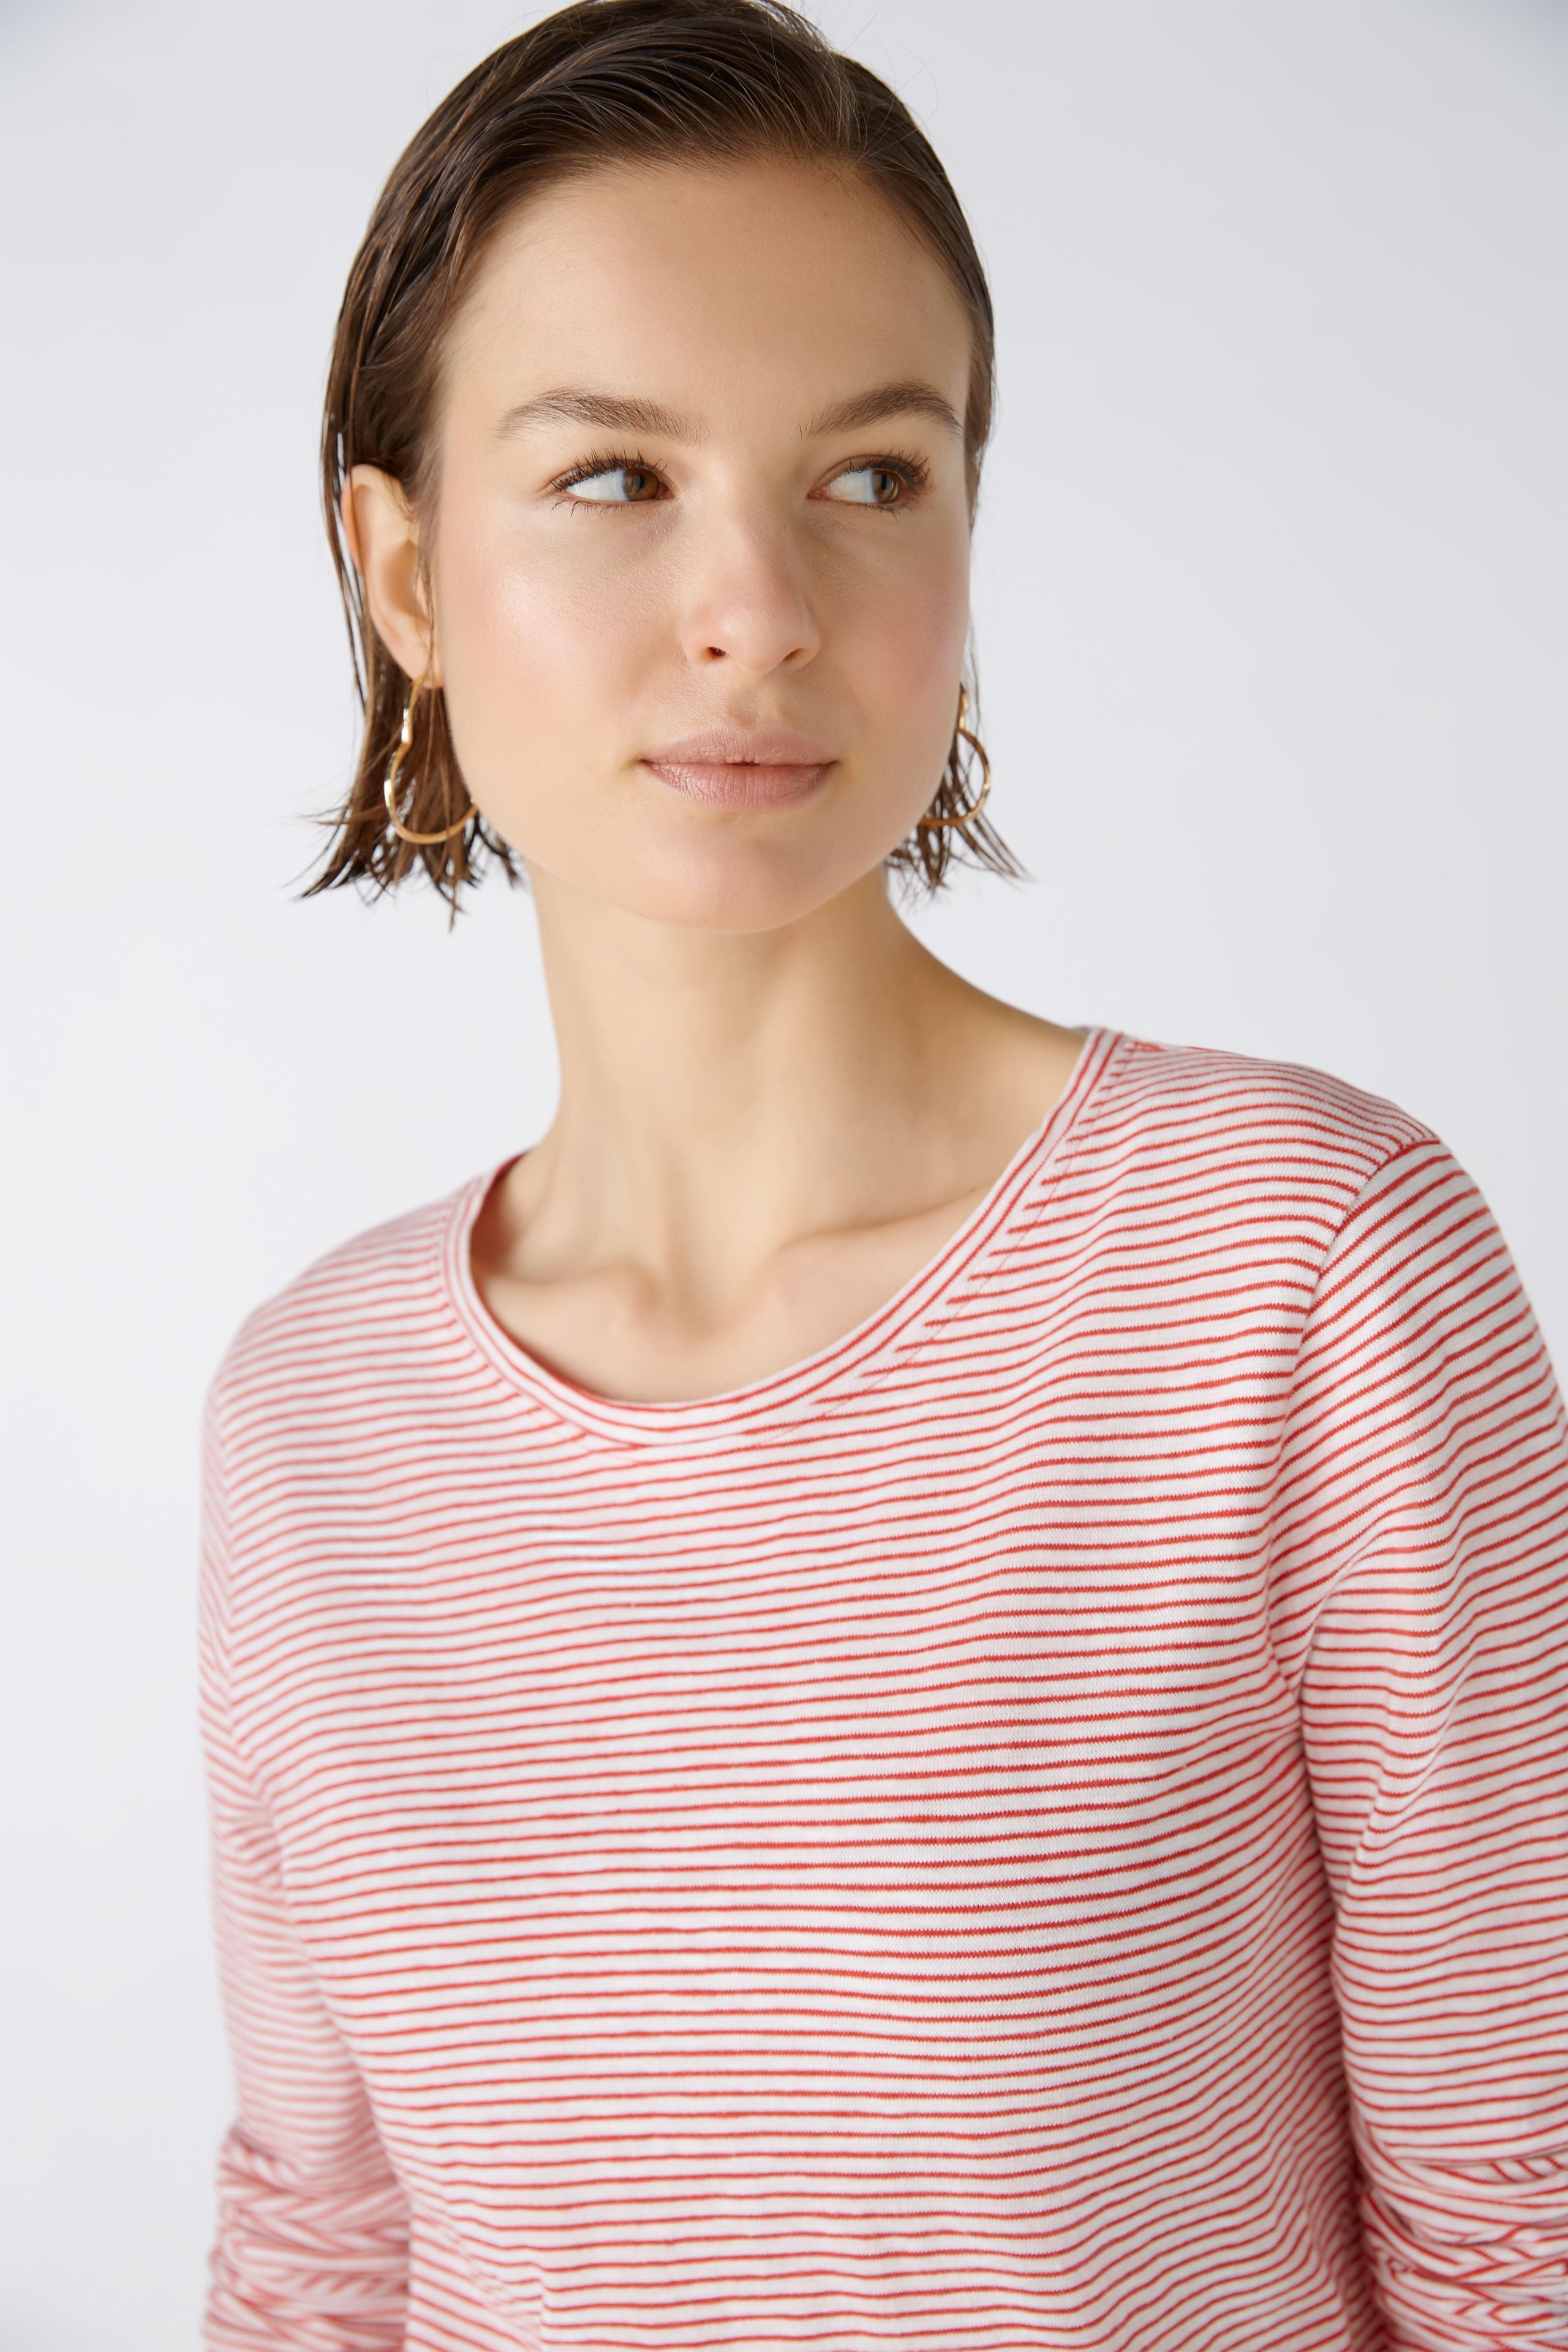 Long Sleeved Stripe Tee in White/Red